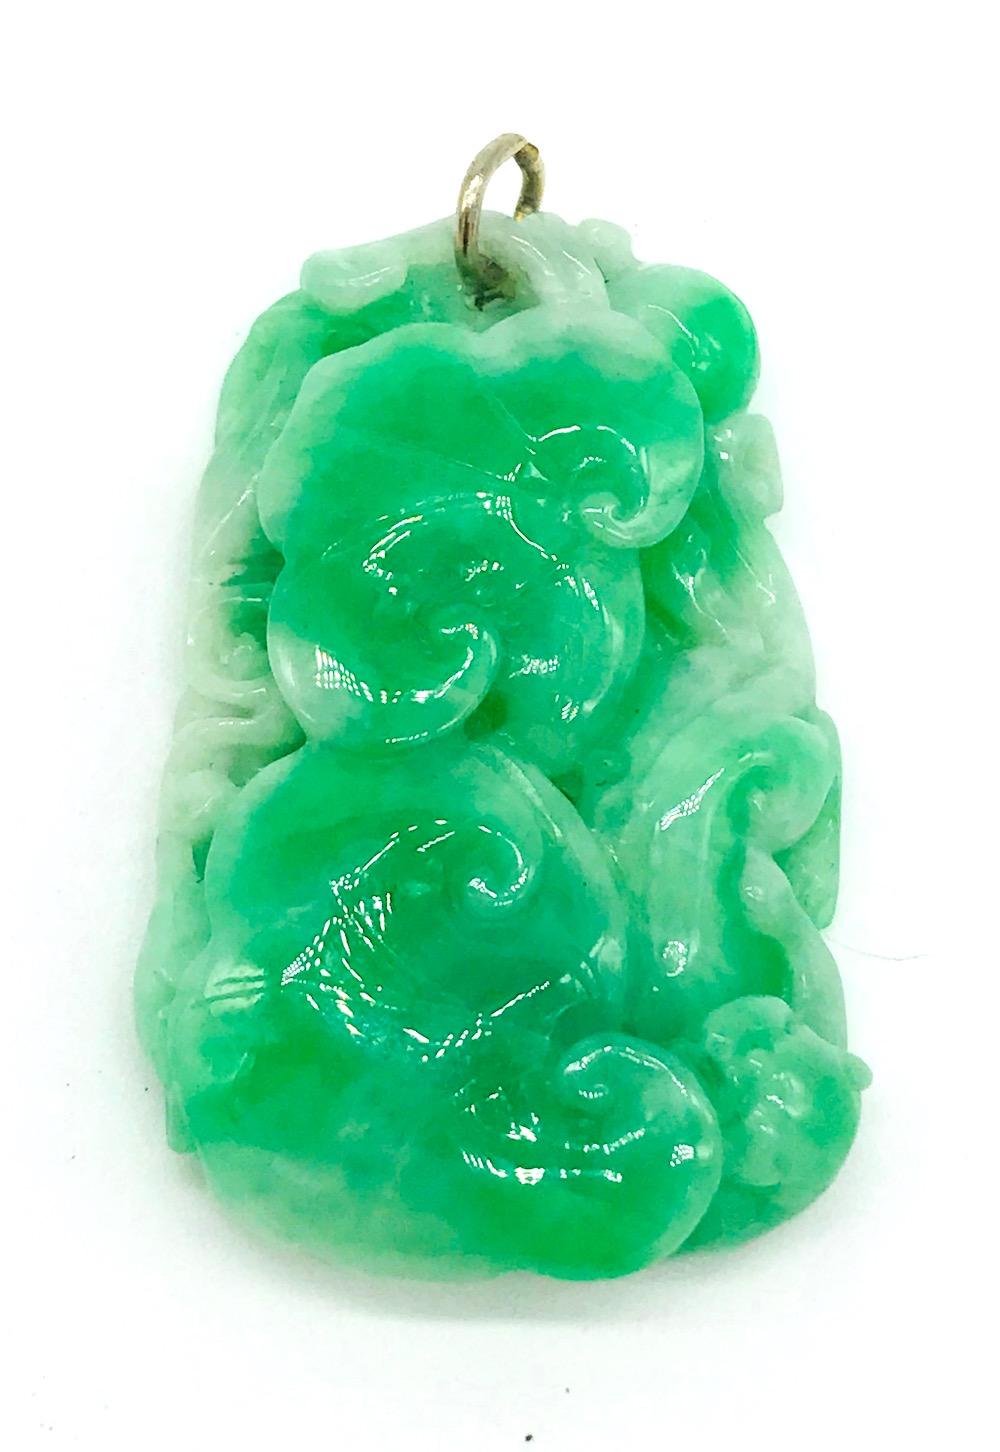 Rich Green Jadeite, Tiger Carving{Pendant with Floral and gold loop<br> Hidden tiger laying on side of carving is garnished In a bed of floral<br>79 grams in weight. Measures 1 x 1-3/4 long<br>GIA Gemologist inspected and evaluated